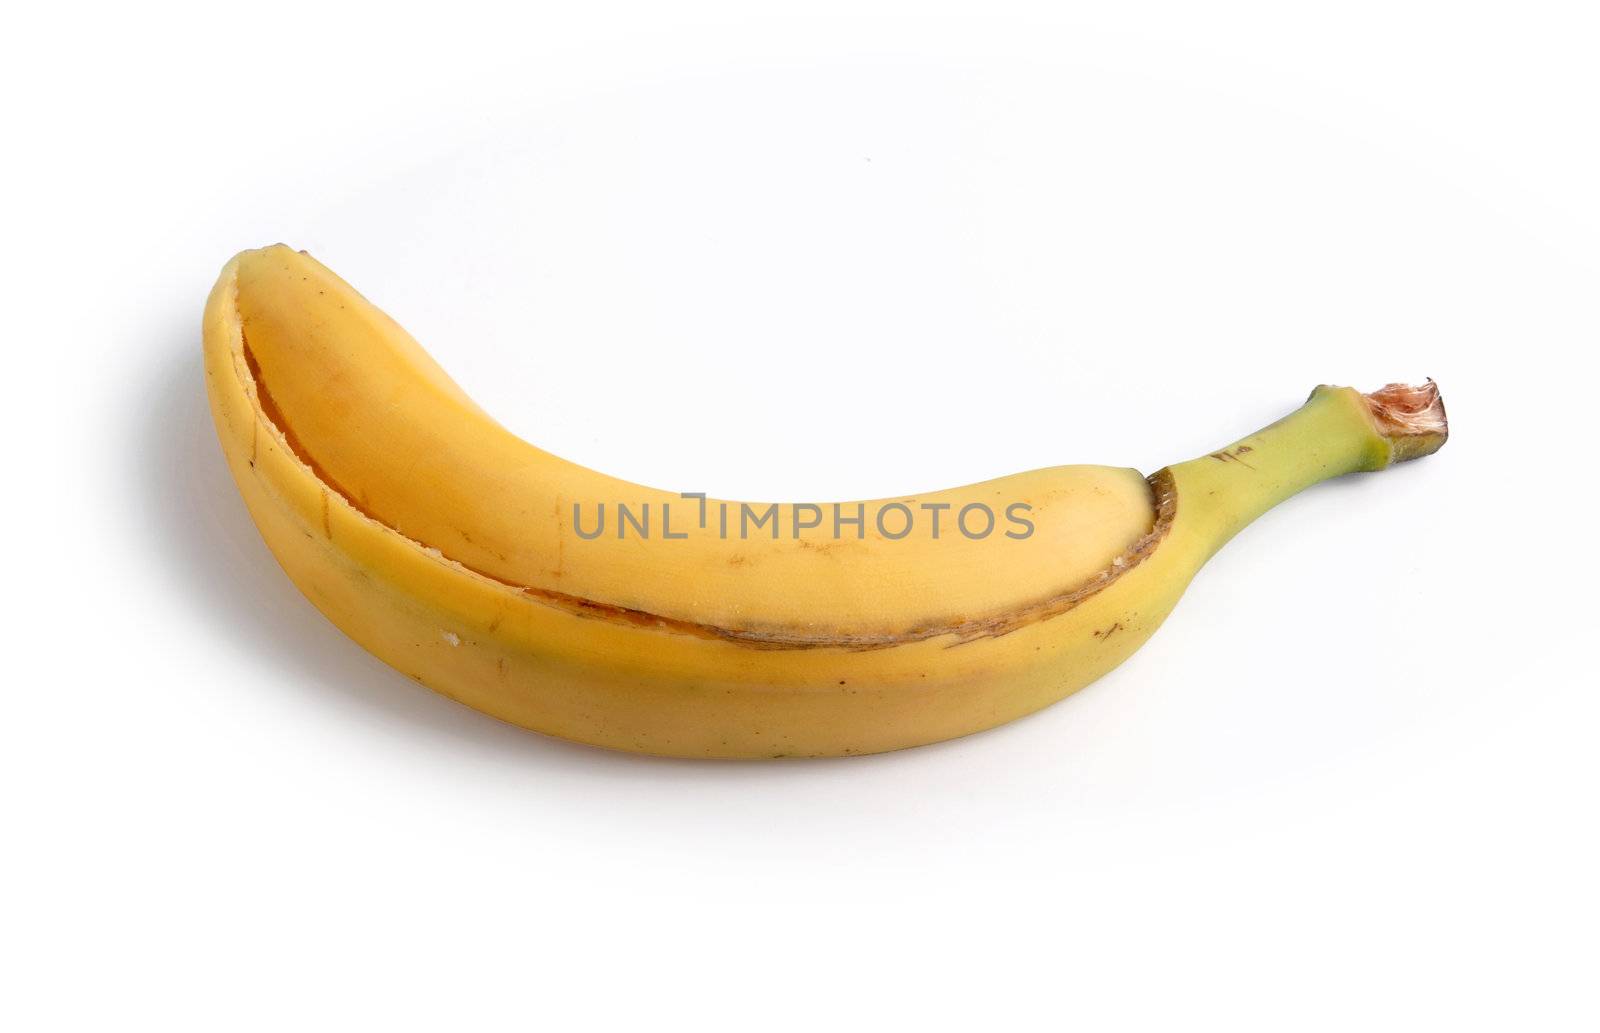 Banana peel with no fruit inside by cienpies